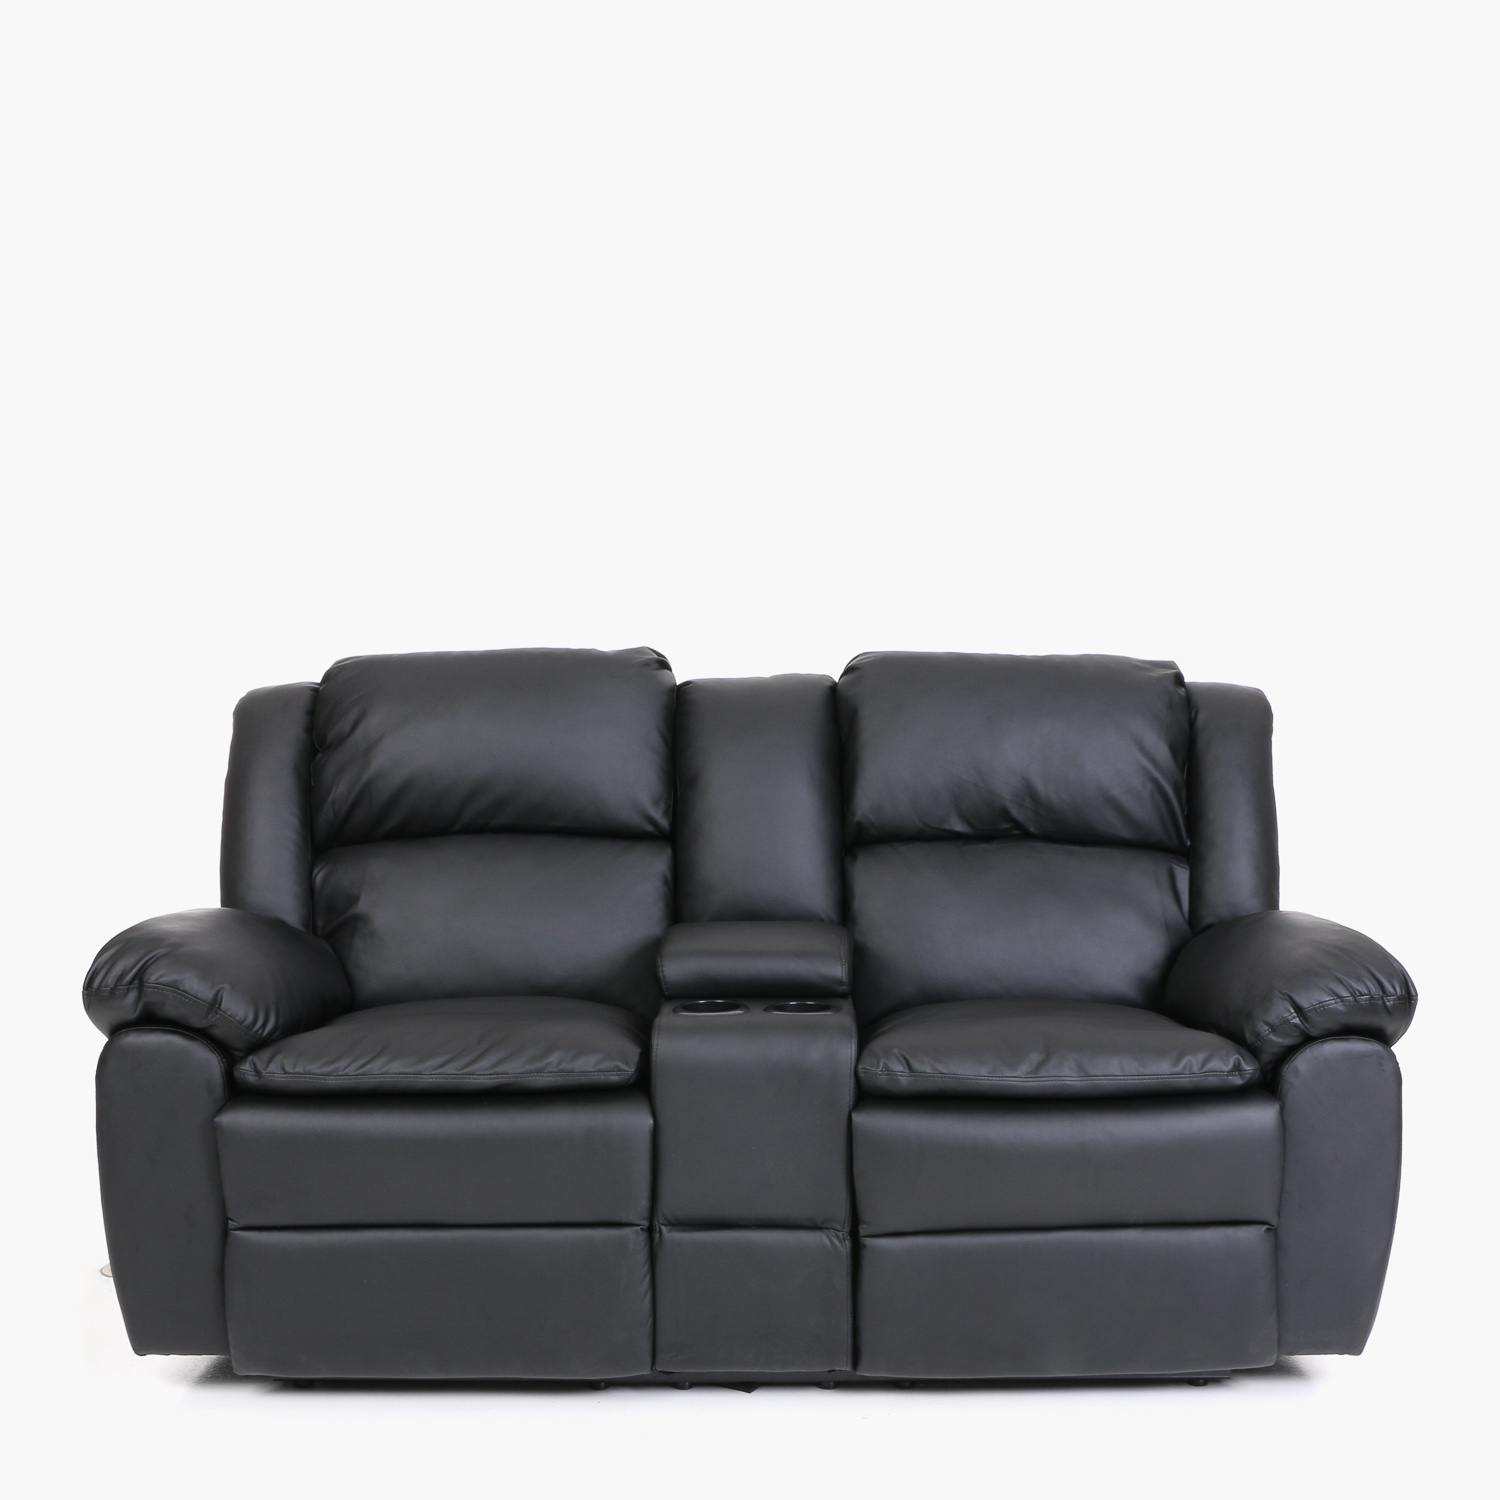 Sm Home Hosh Air Leather Recliner 2 Seater Black